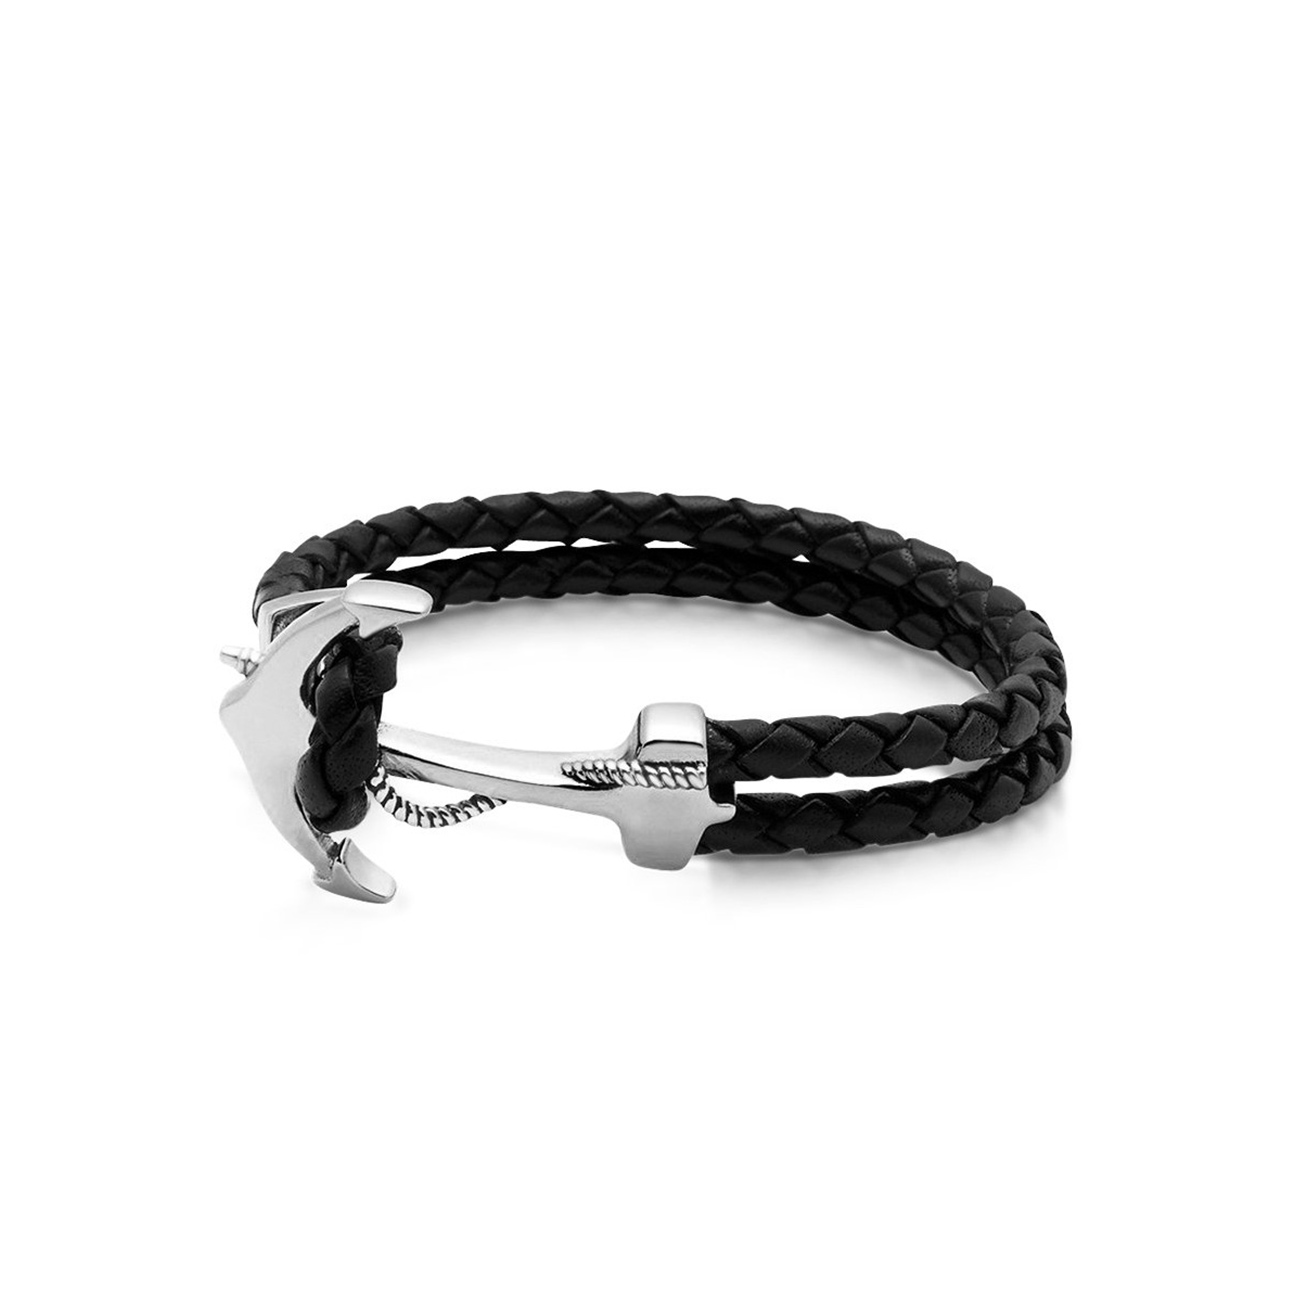 Nialaya Men's Black Leather Bracelet with Silver Plated Anchor